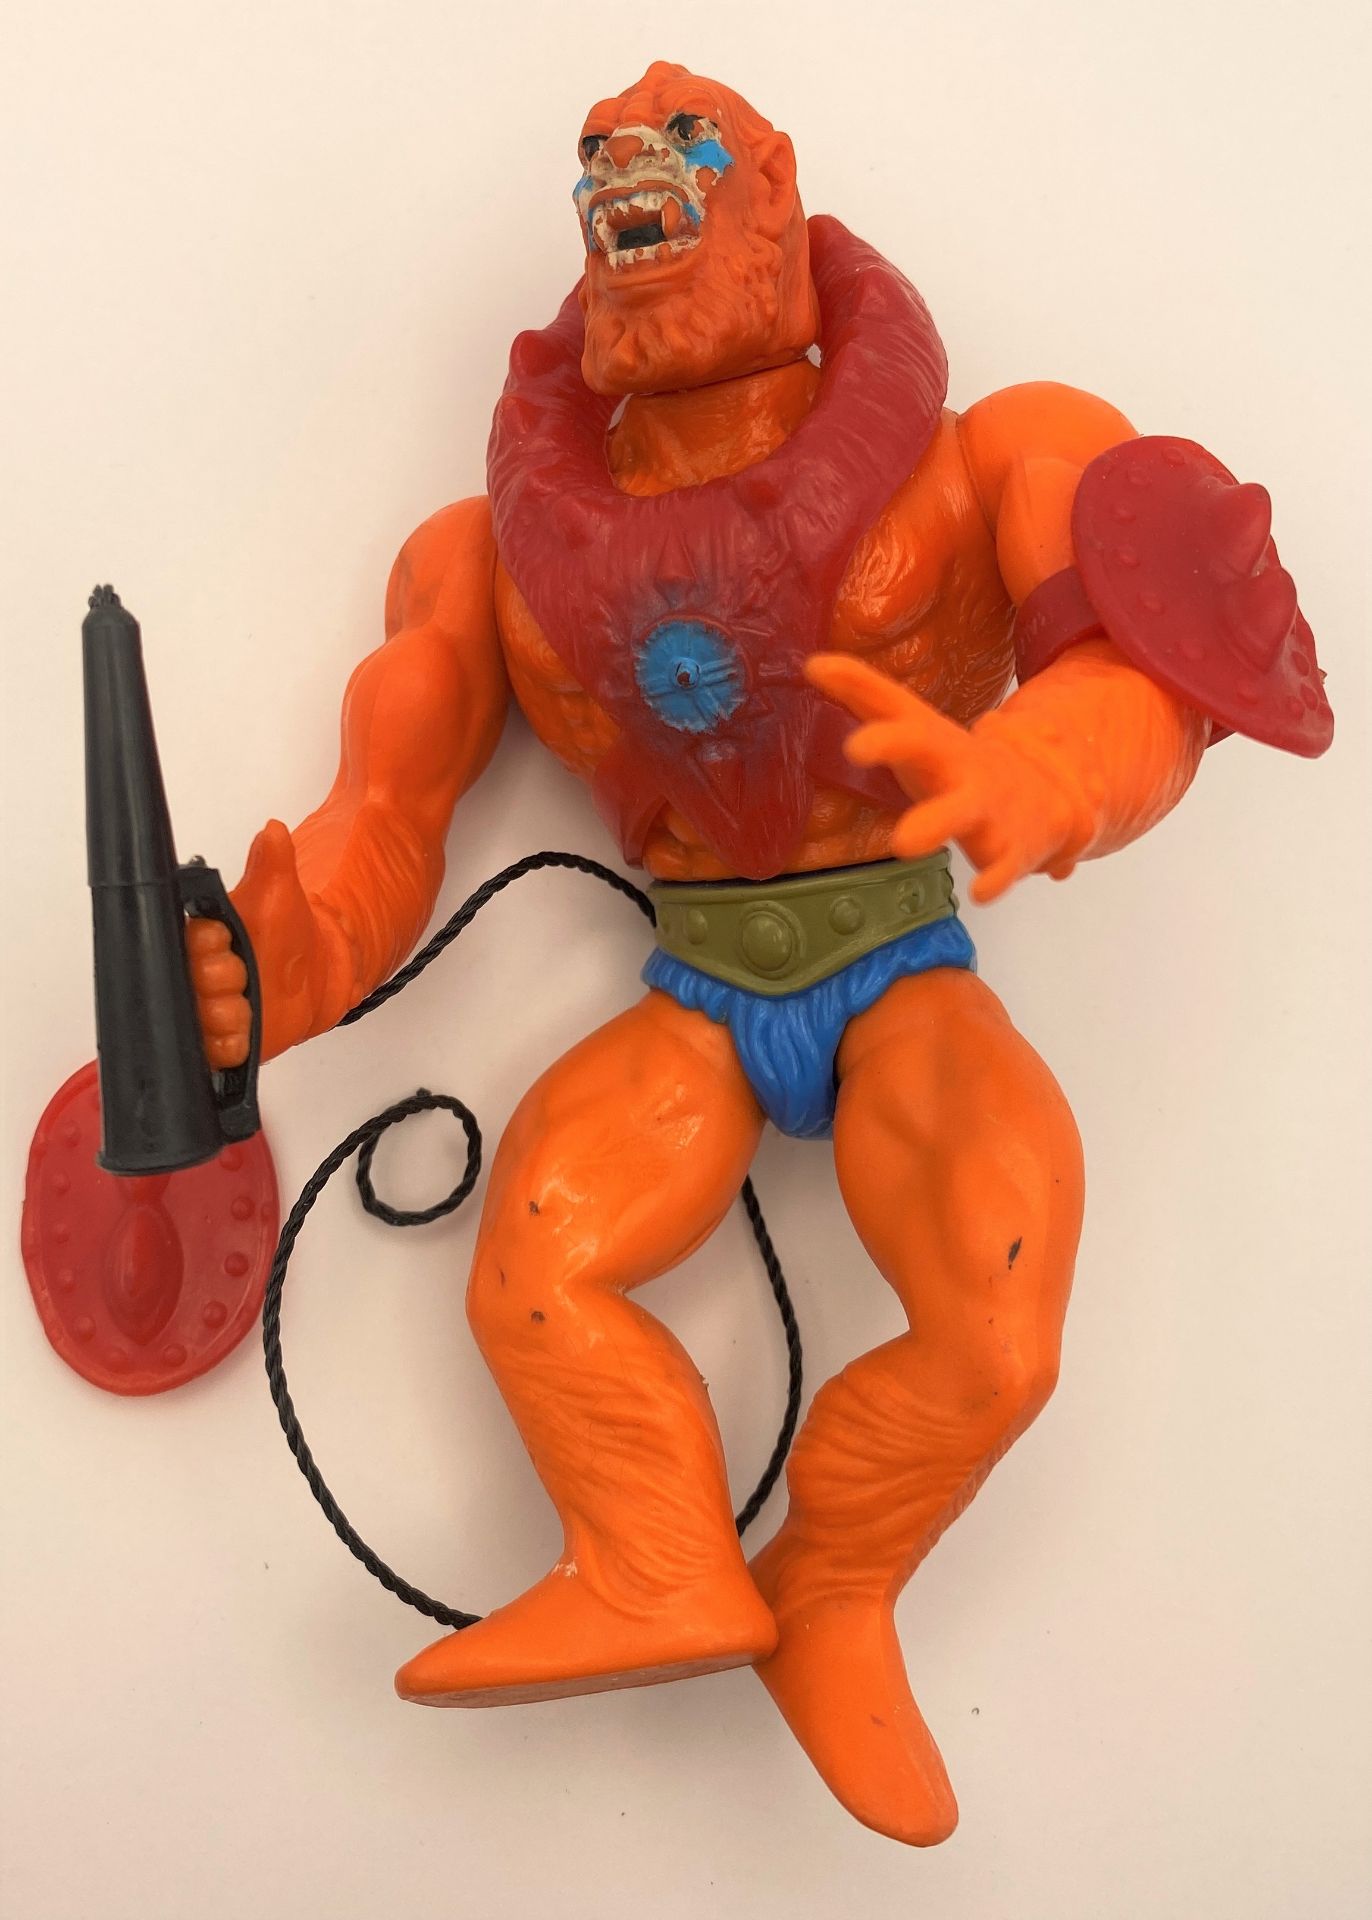 BEASTMAN - Vintage Masters of the Universe Figure (MOTU) Further Information Will - Image 3 of 5